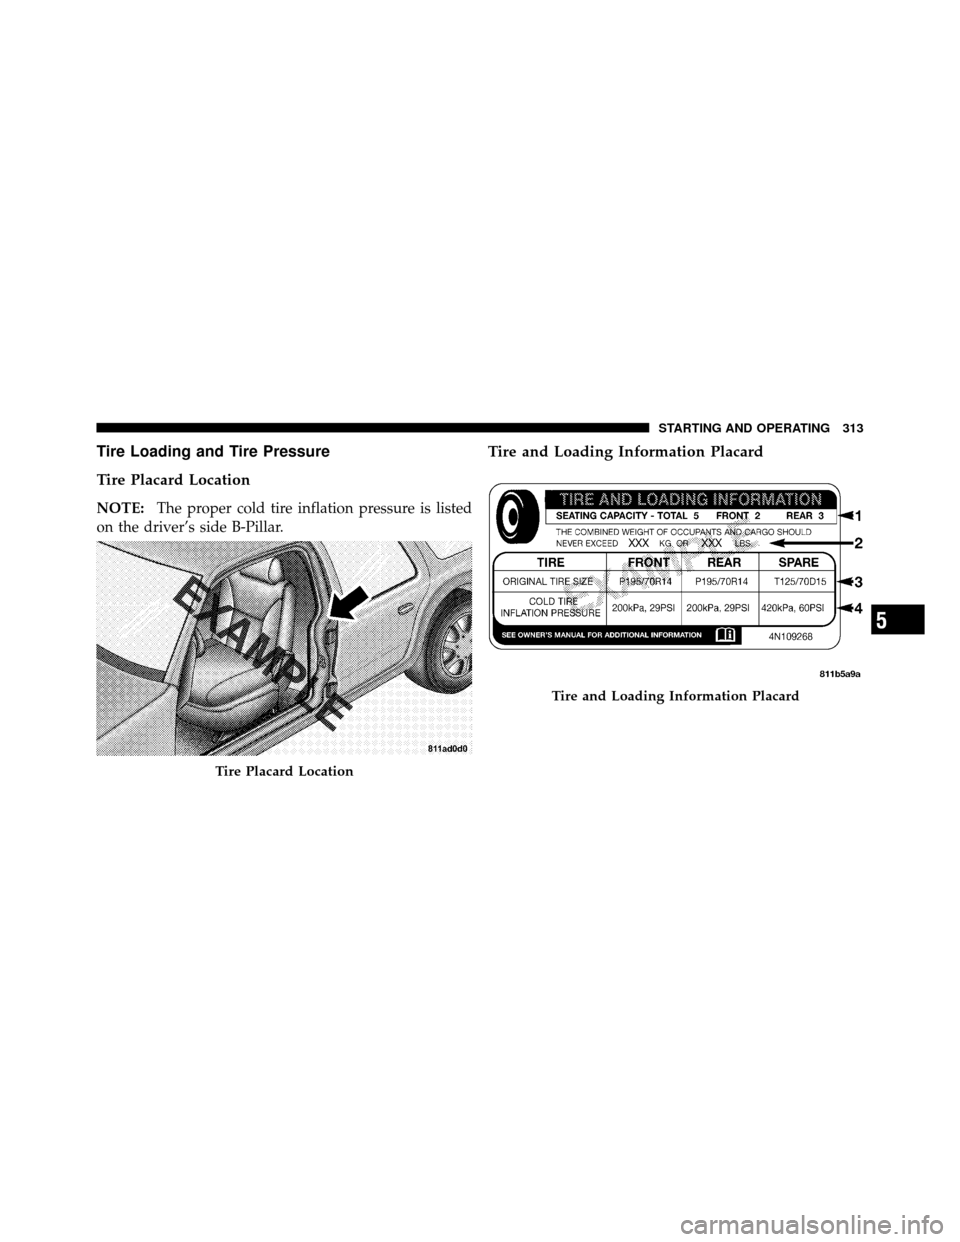 JEEP COMPASS 2010 1.G Owners Manual Tire Loading and Tire Pressure
Tire Placard Location
NOTE:The proper cold tire inflation pressure is listed
on the driver’s side B-Pillar.
Tire and Loading Information Placard
Tire Placard Location
